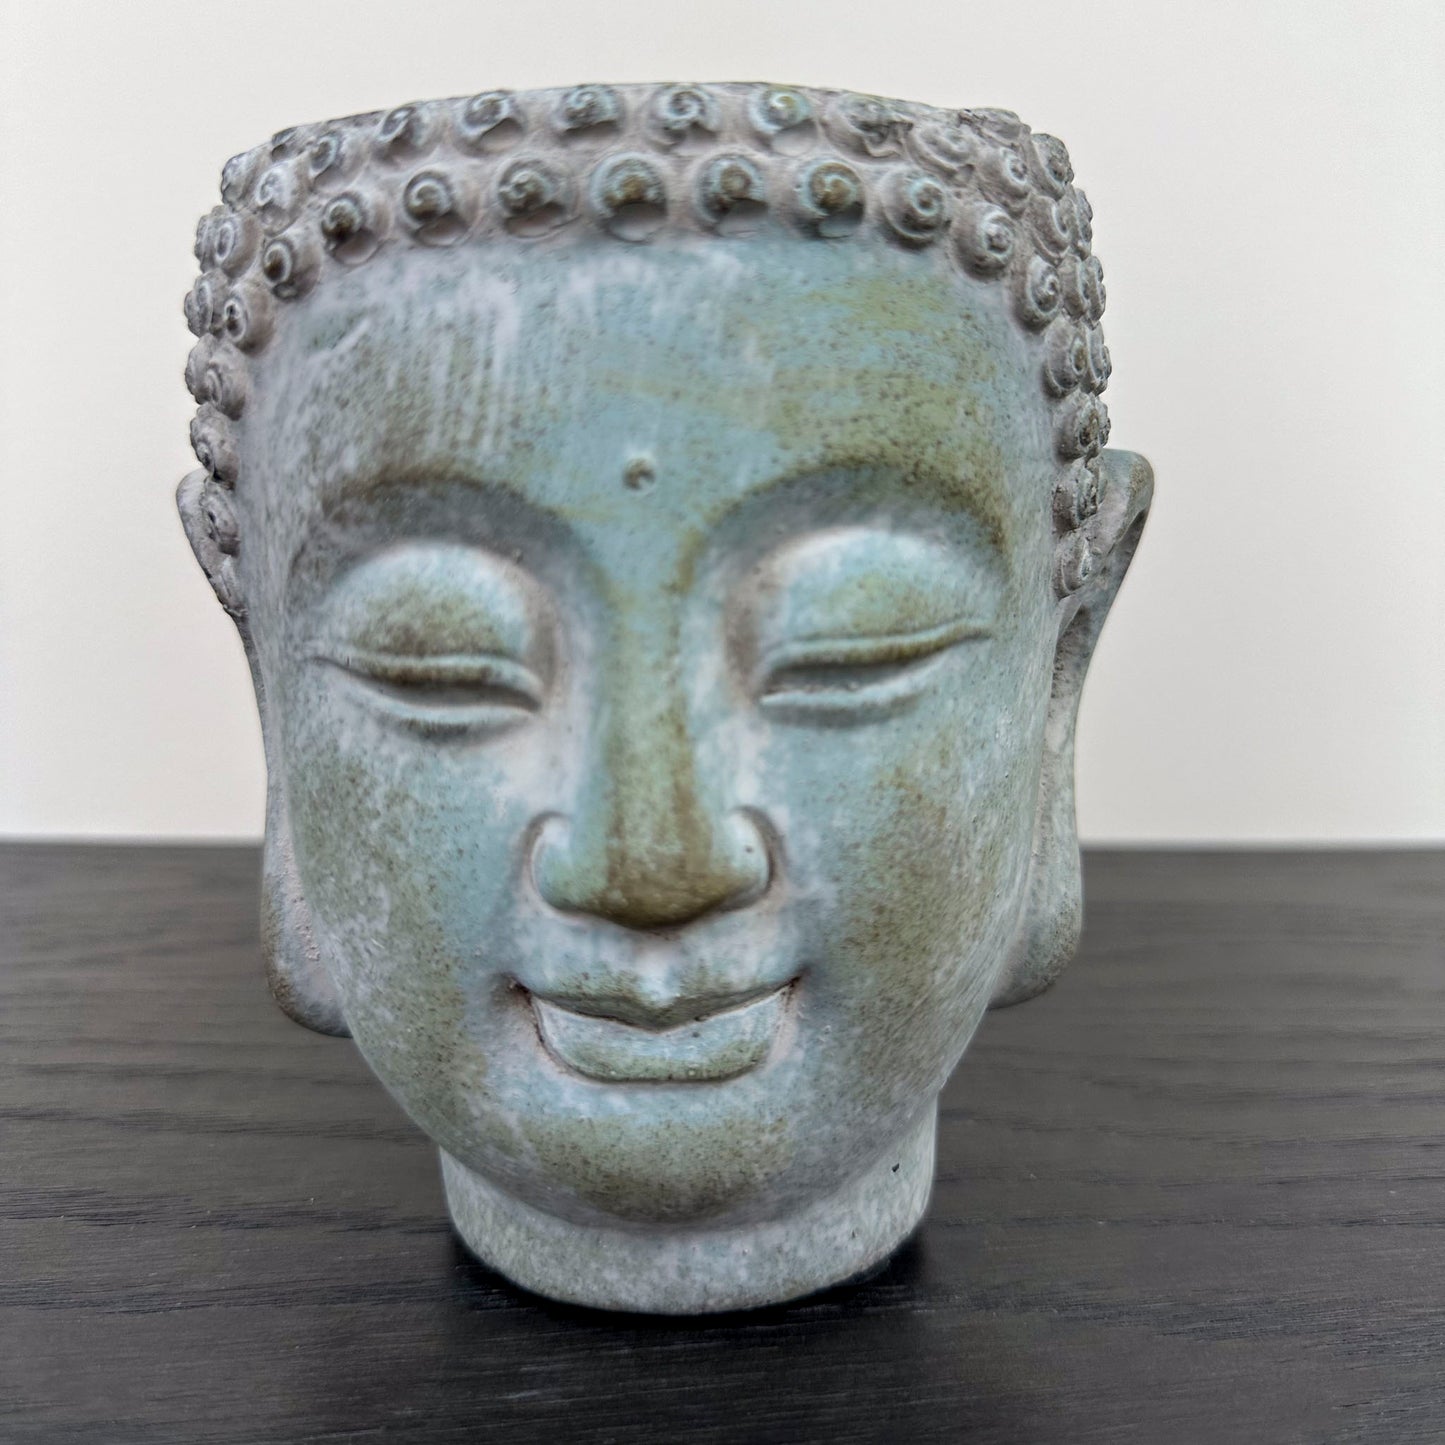 Close up of Buddha head planter, concrete finish with blue teal discoloration